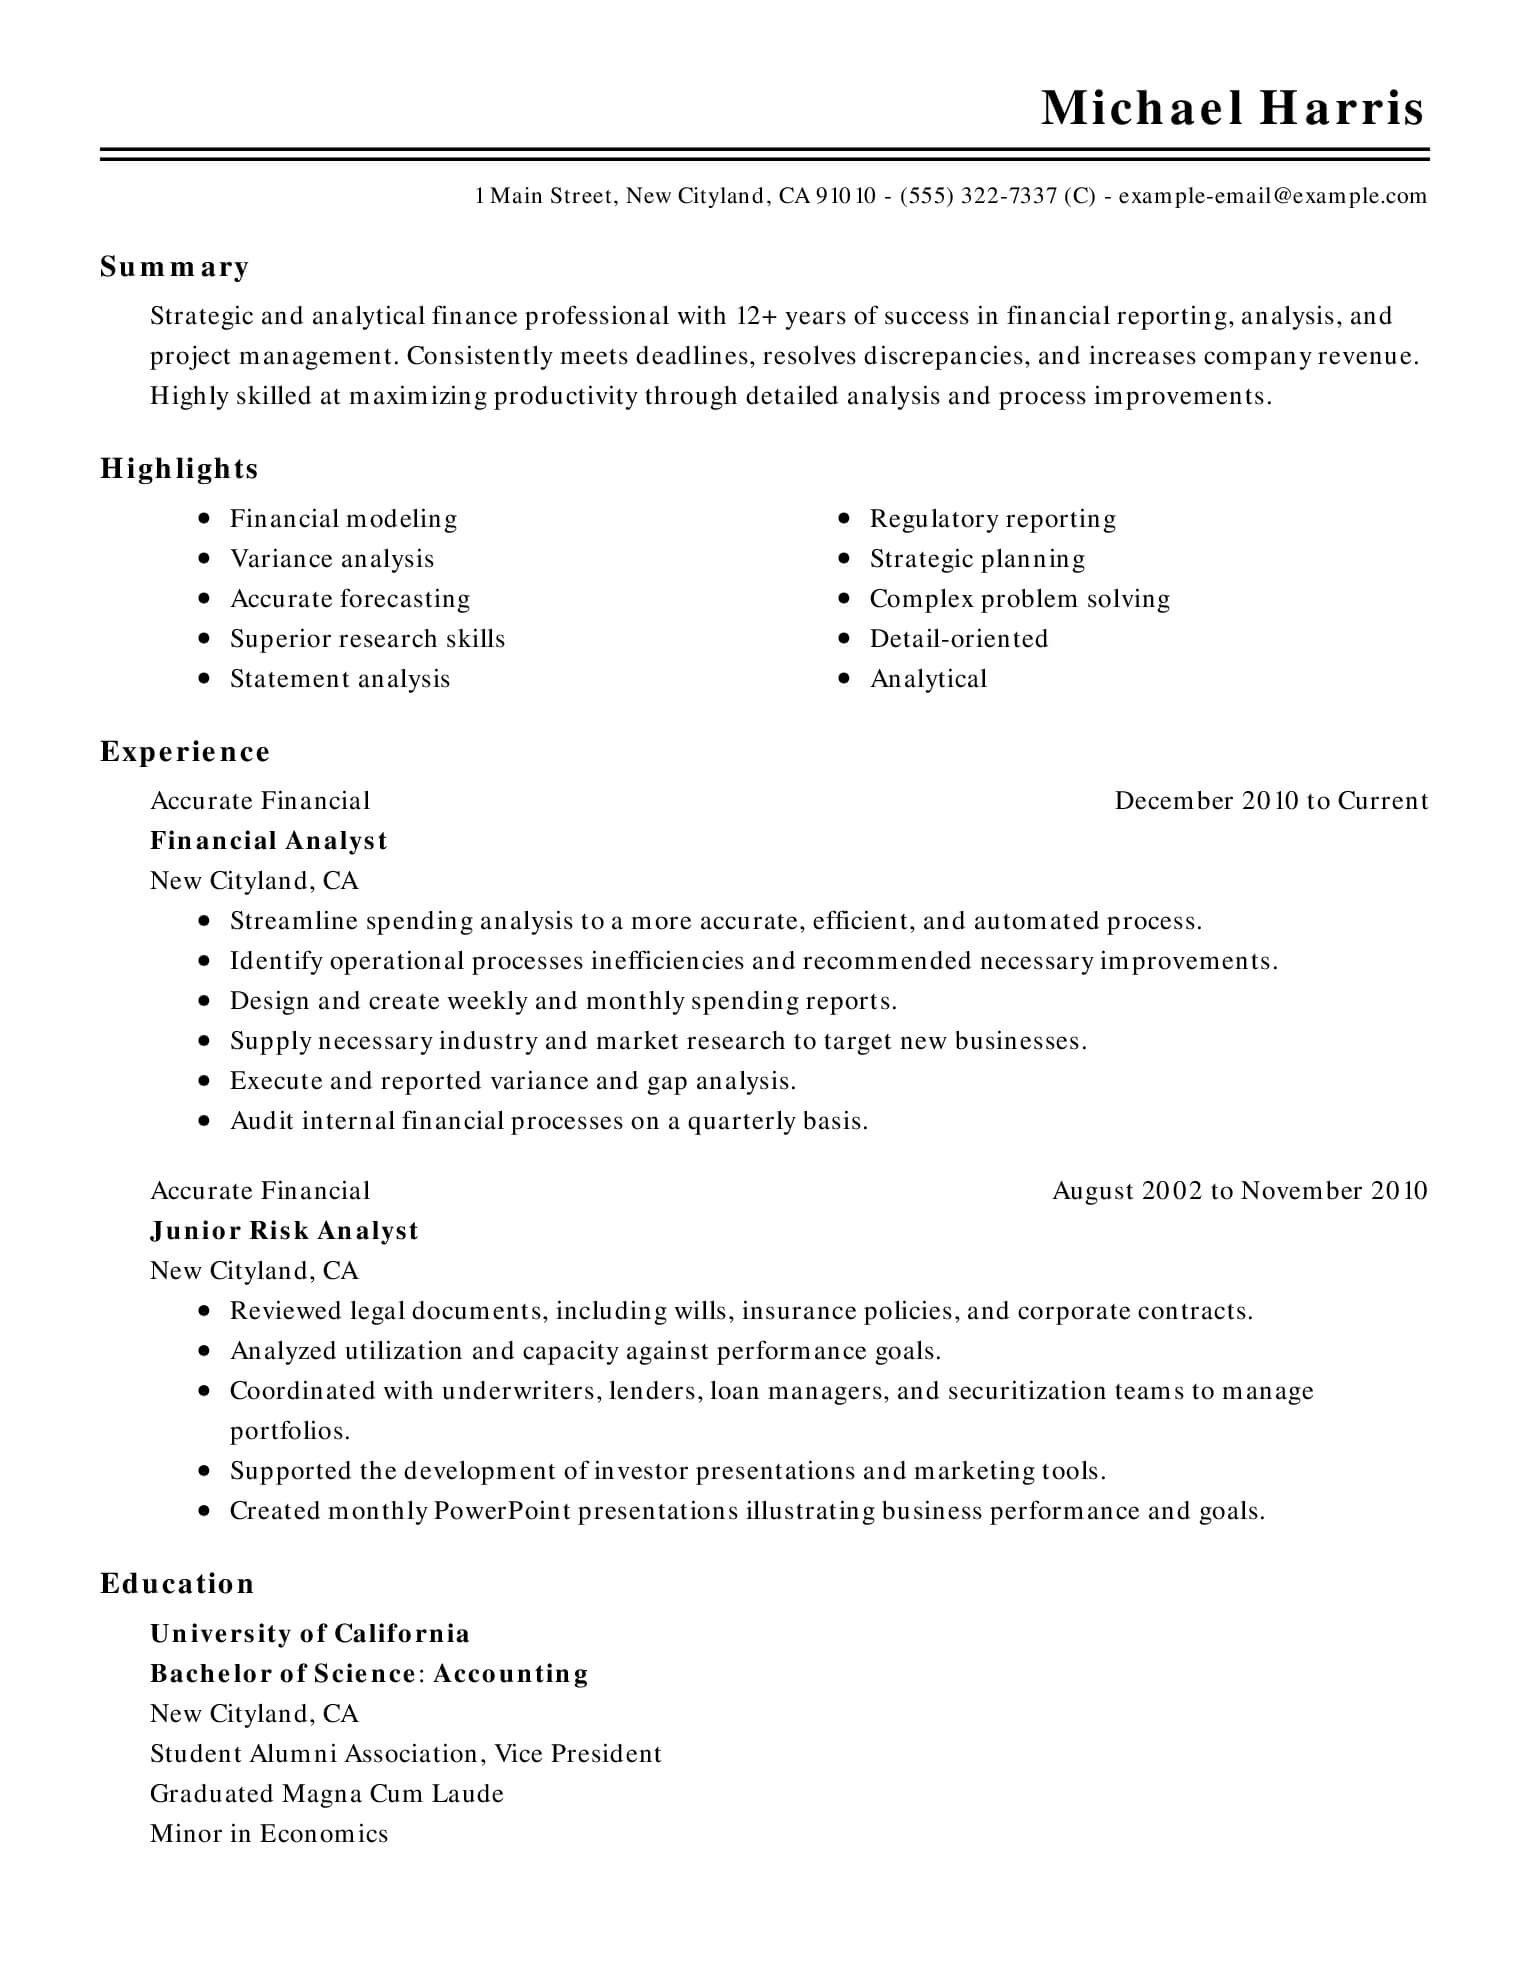 Resume Template Microsoft Word 15 Of the Best Resume Templates for Microsoft Word Fice